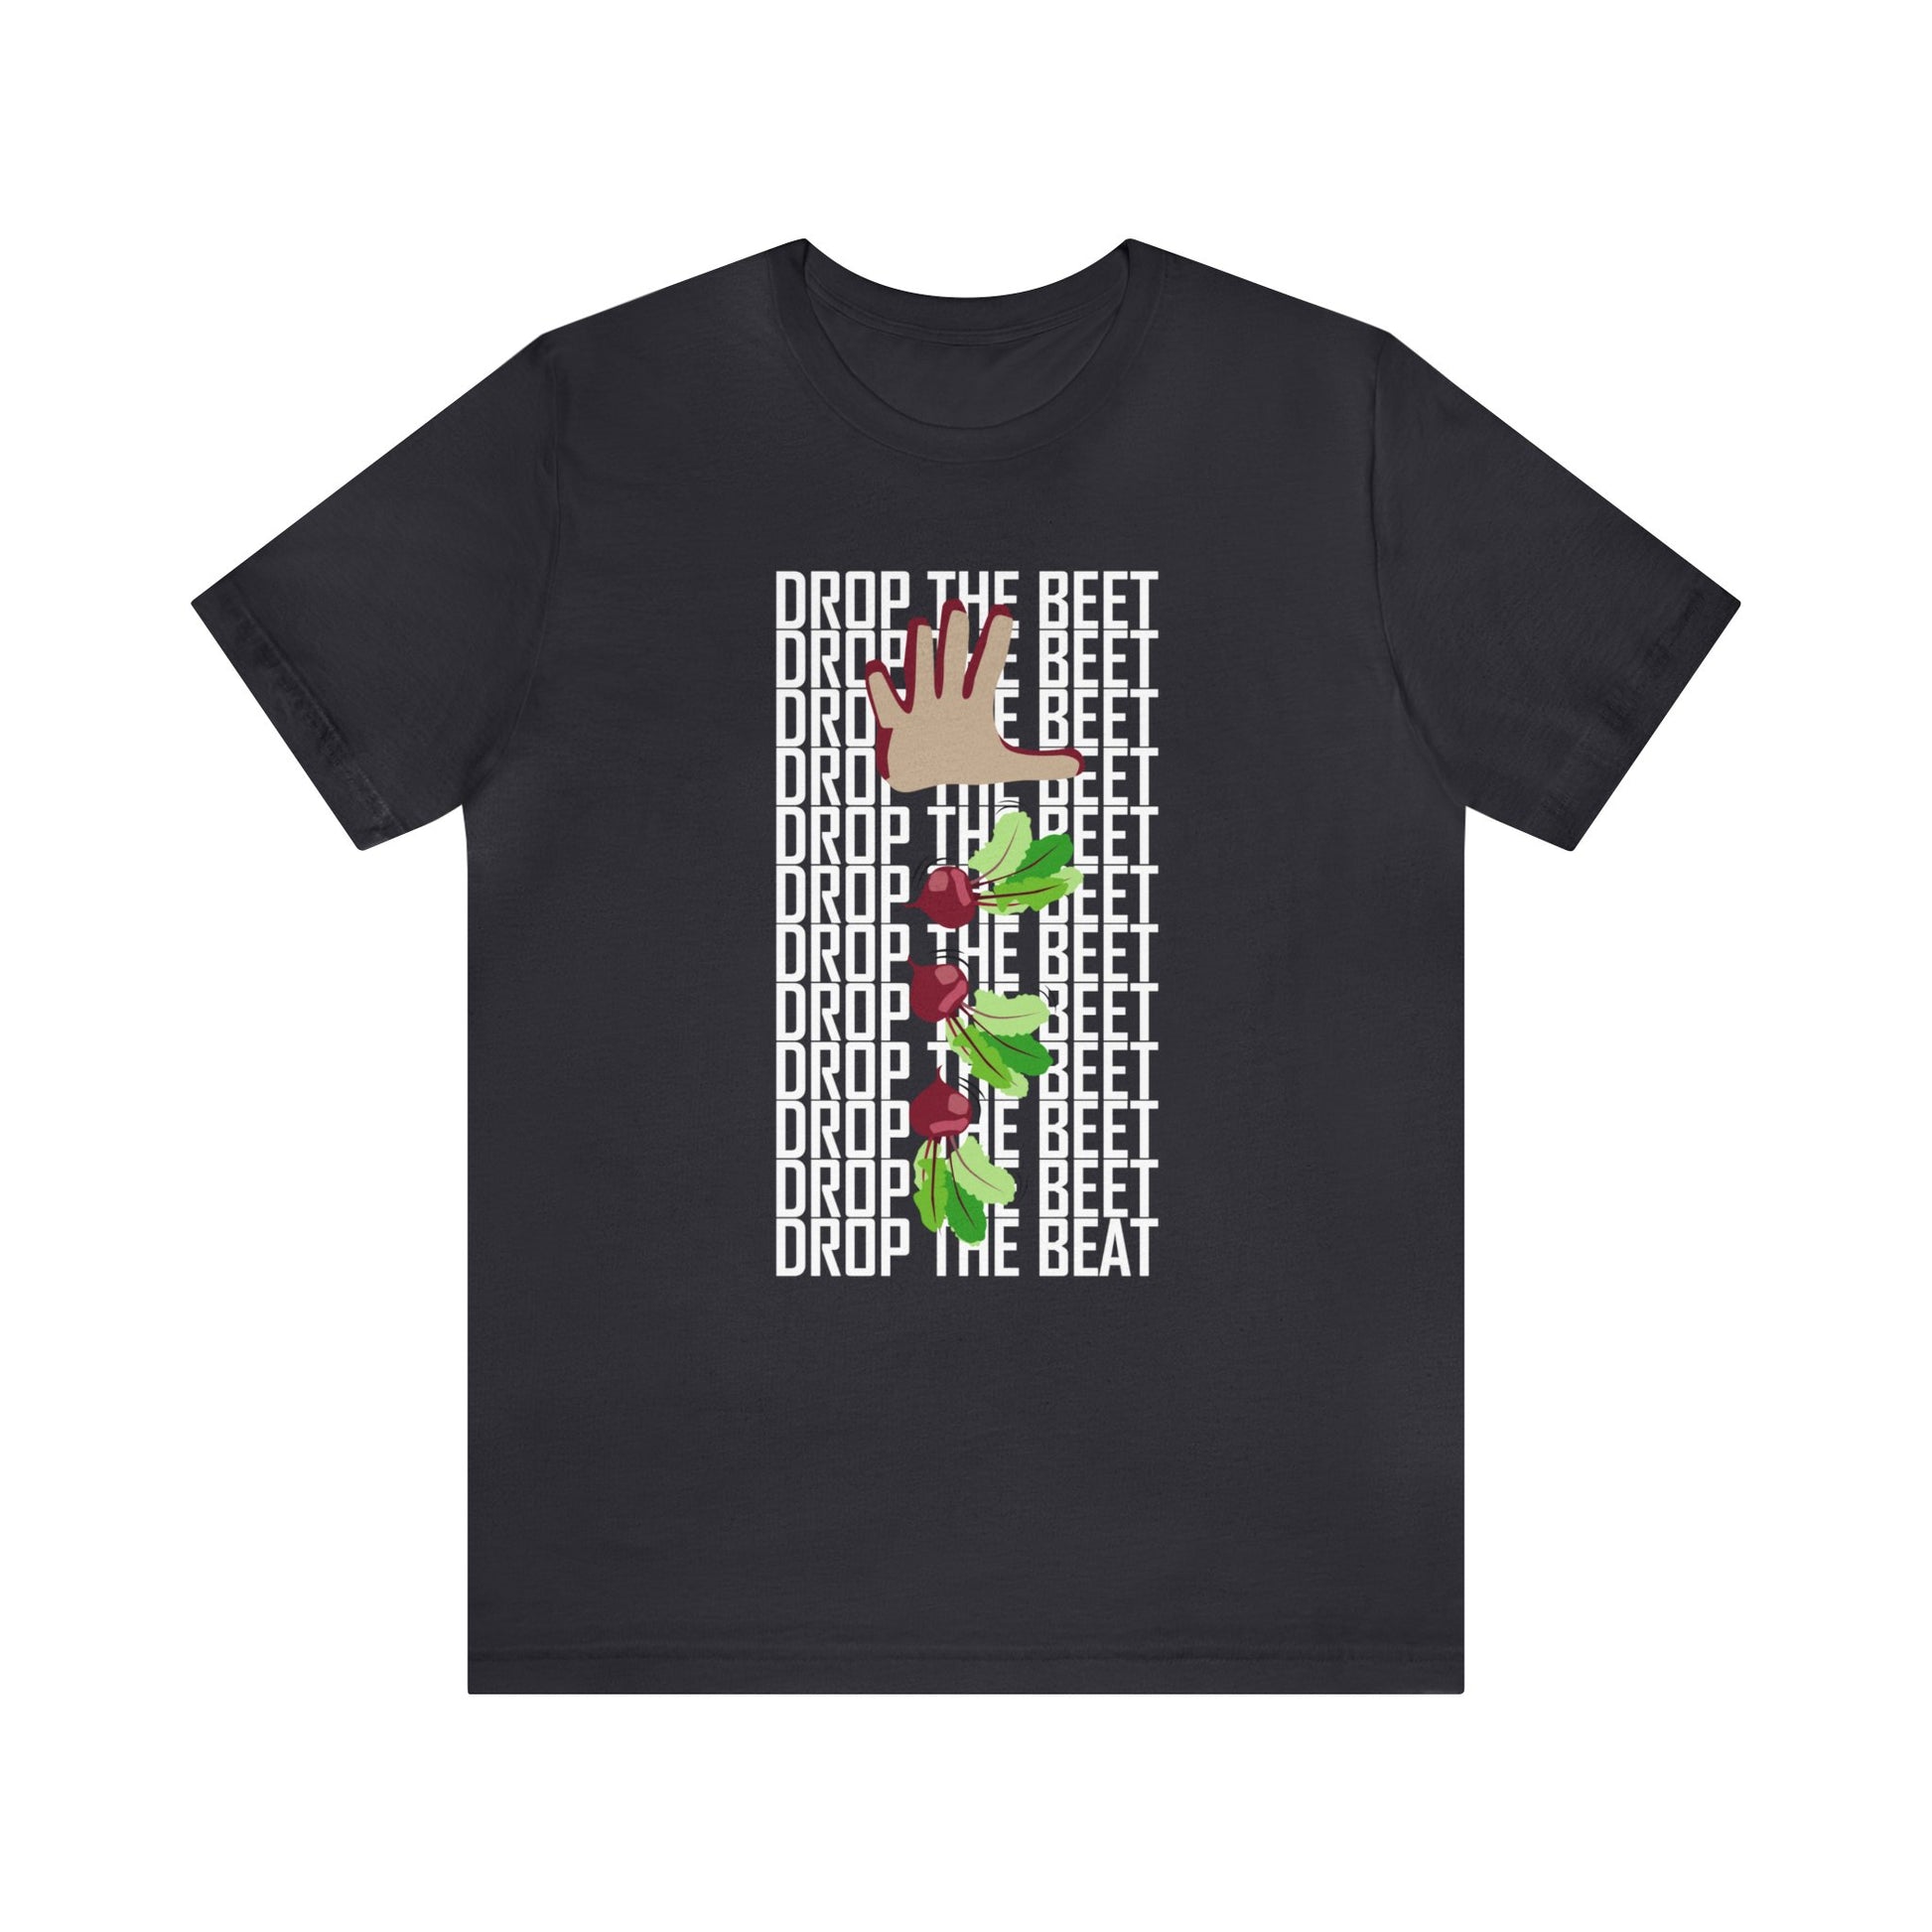 Music pun graphic tee.  Picture of a hand dropping a beet with the words "drop the beet" and "drop the beat" arrayed behind the graphic.  Grey shirt.